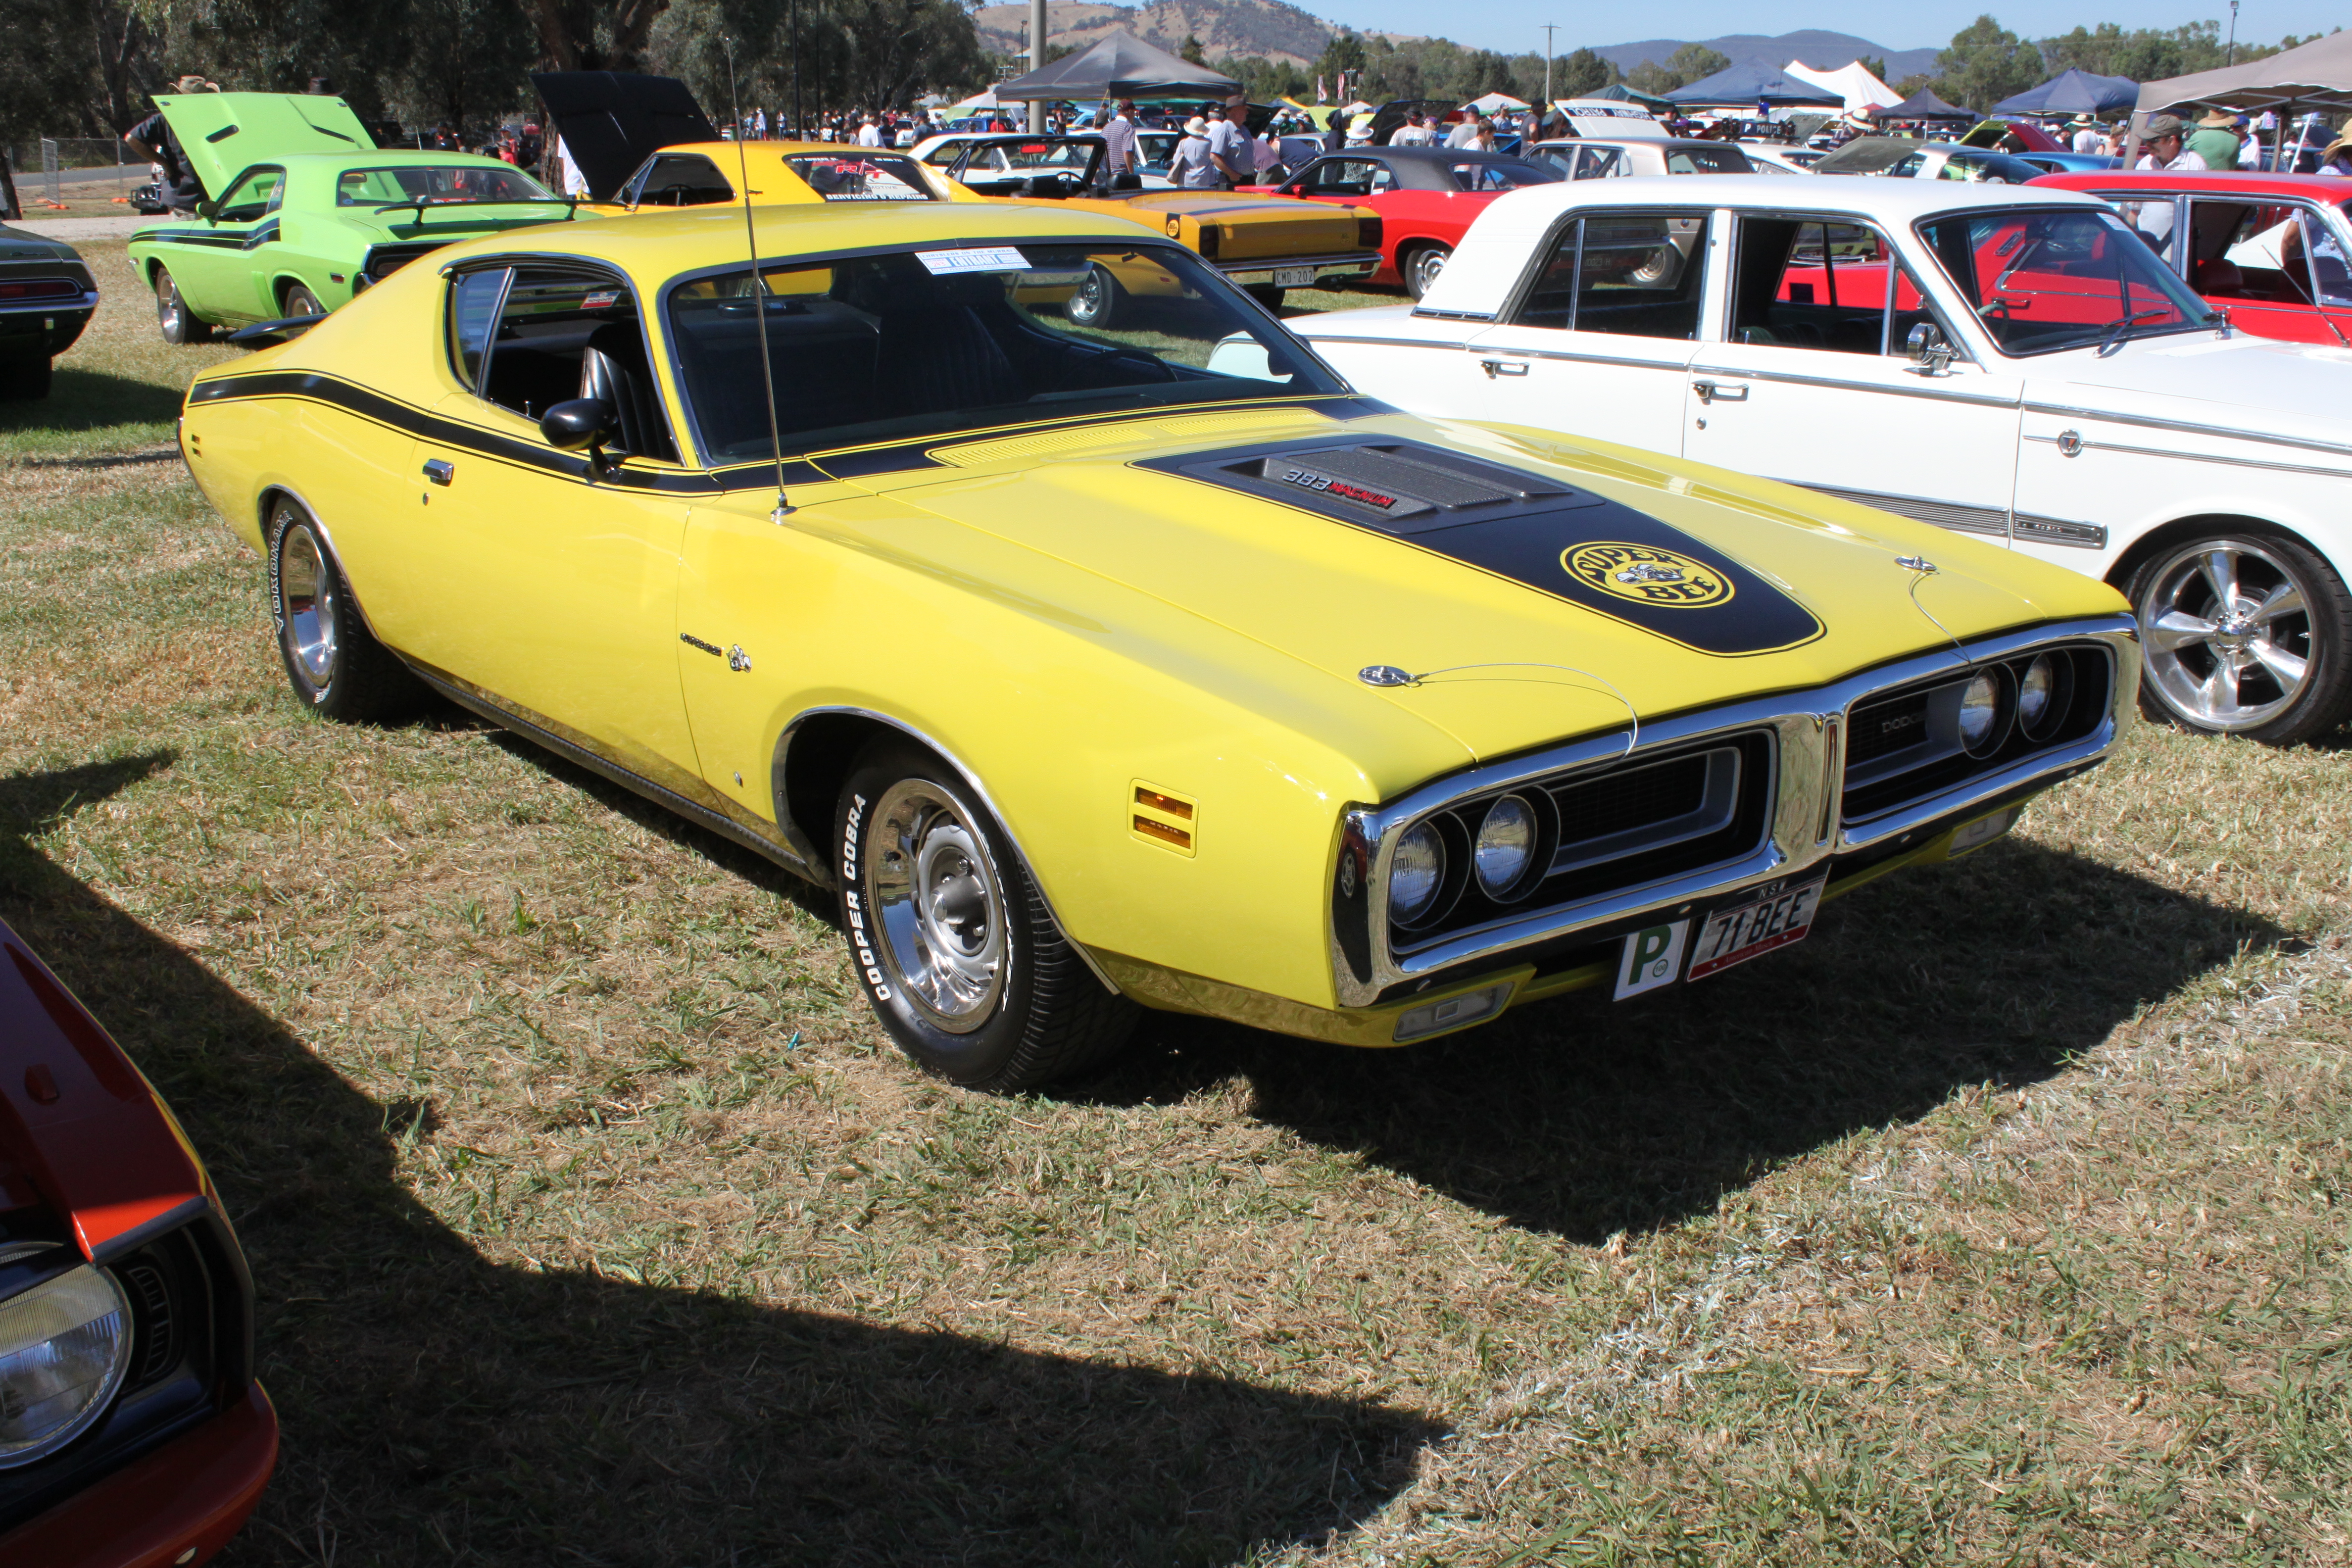 File:1971 Dodge Charger Super Bee (16986786802).jpg - Wikimedia Commons